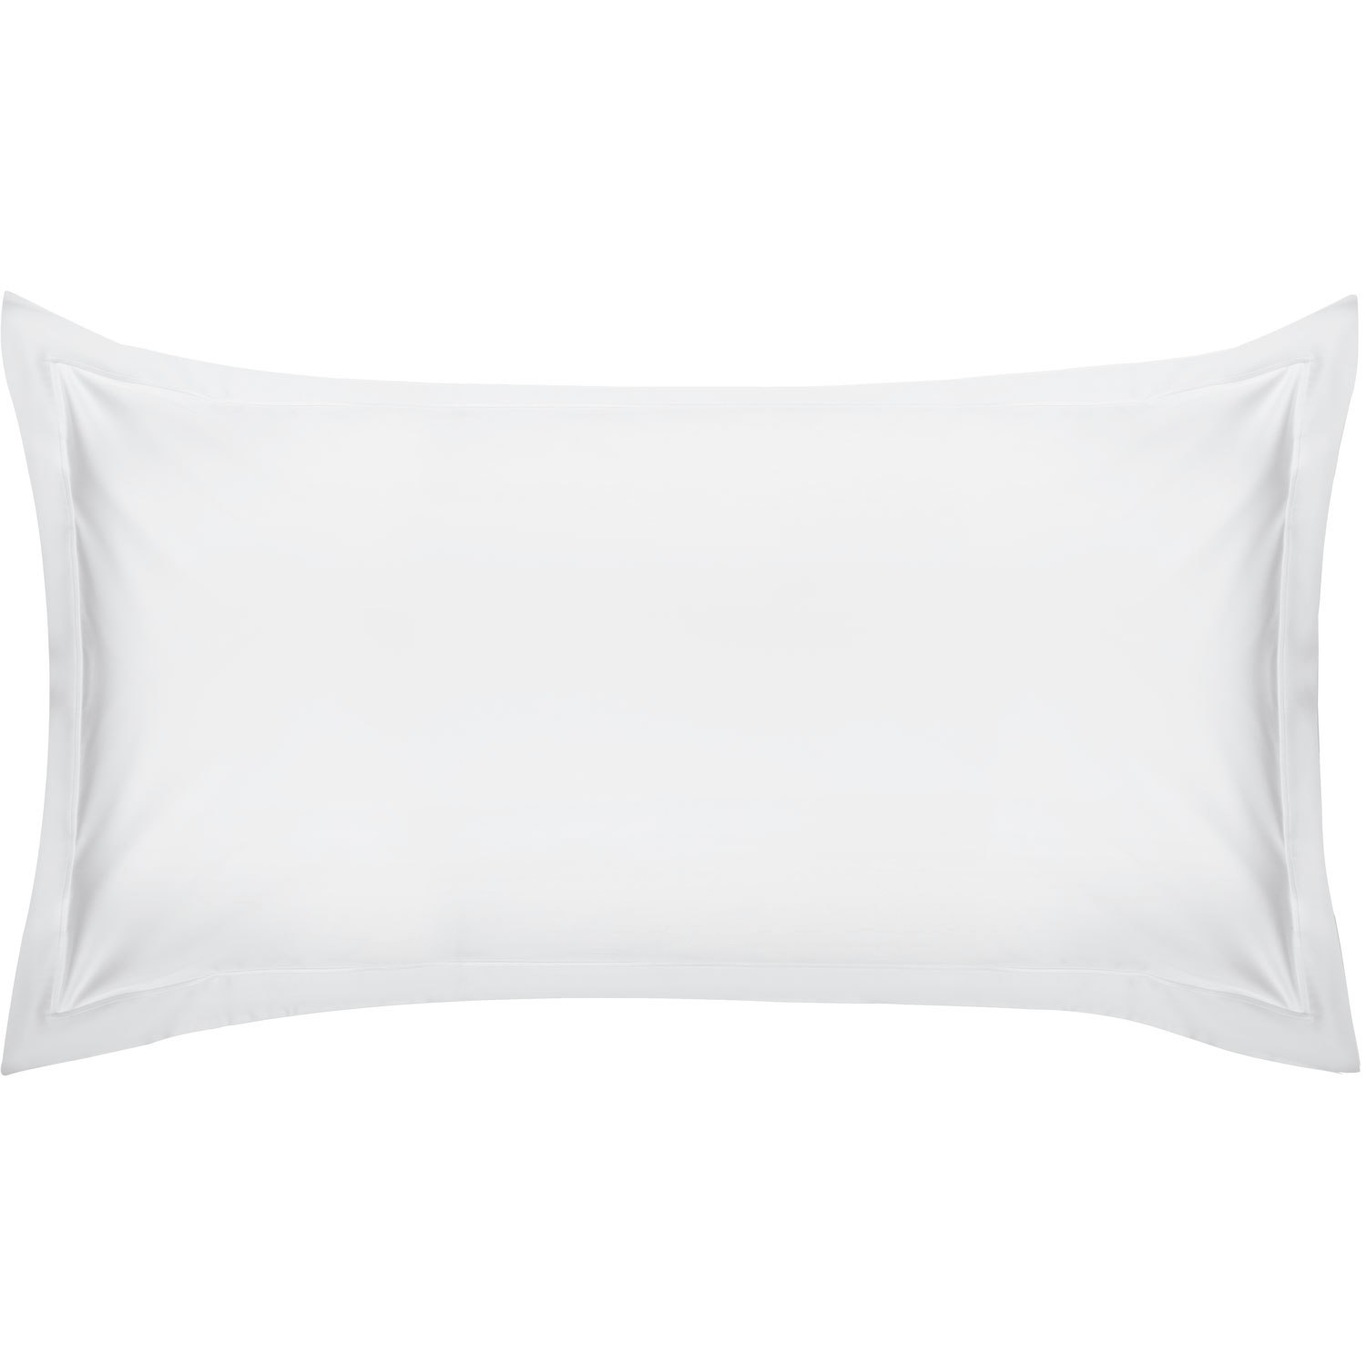 Spirit Pillowcase With Embroidery 2-pack 50x90 cm, Pure White